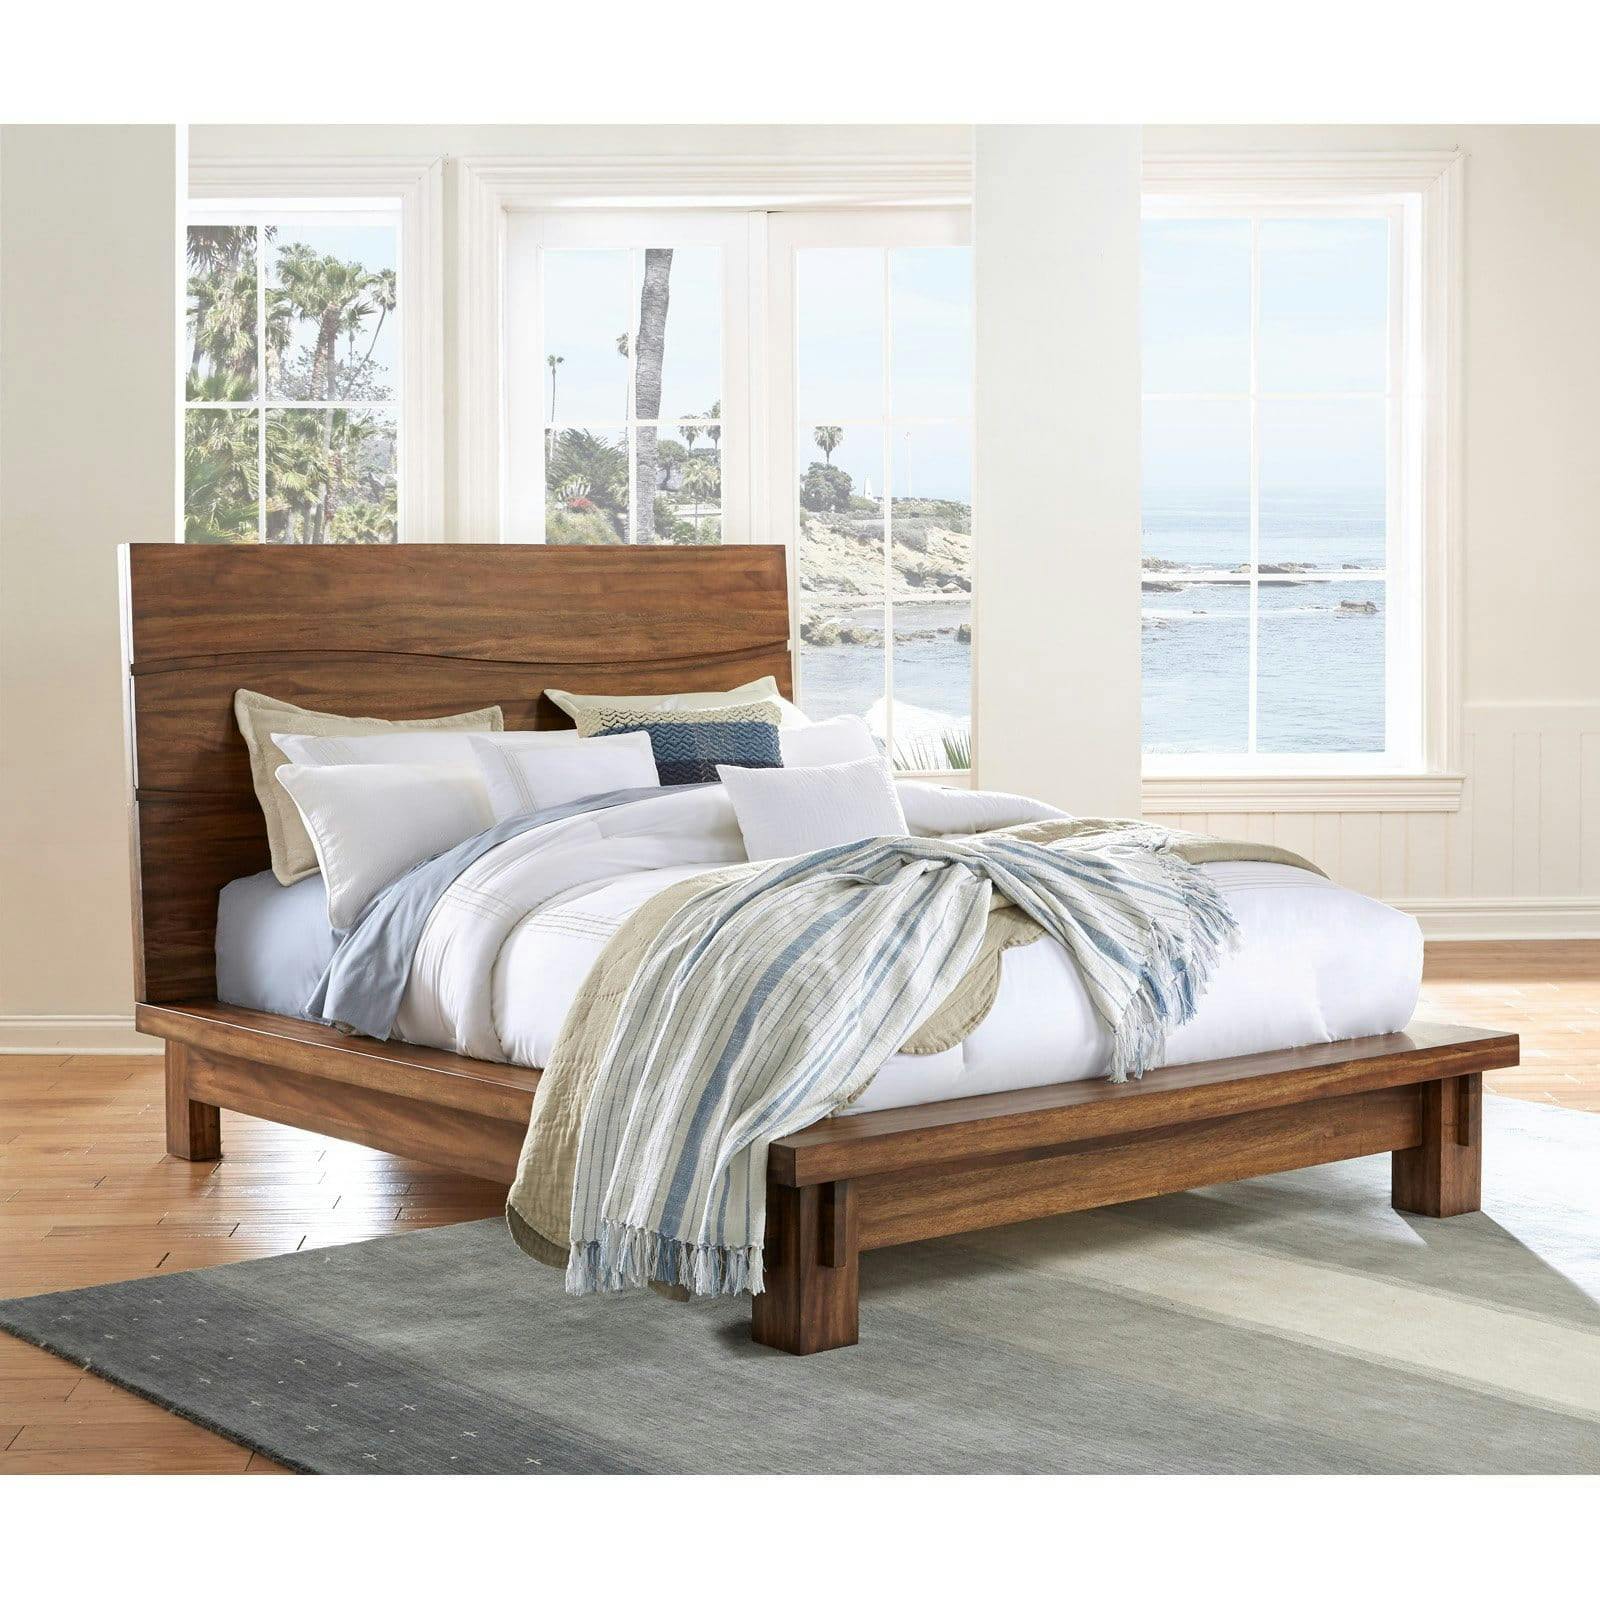 Coastal Chic King-Sized Solid Wood Platform Bed with Wave Headboard